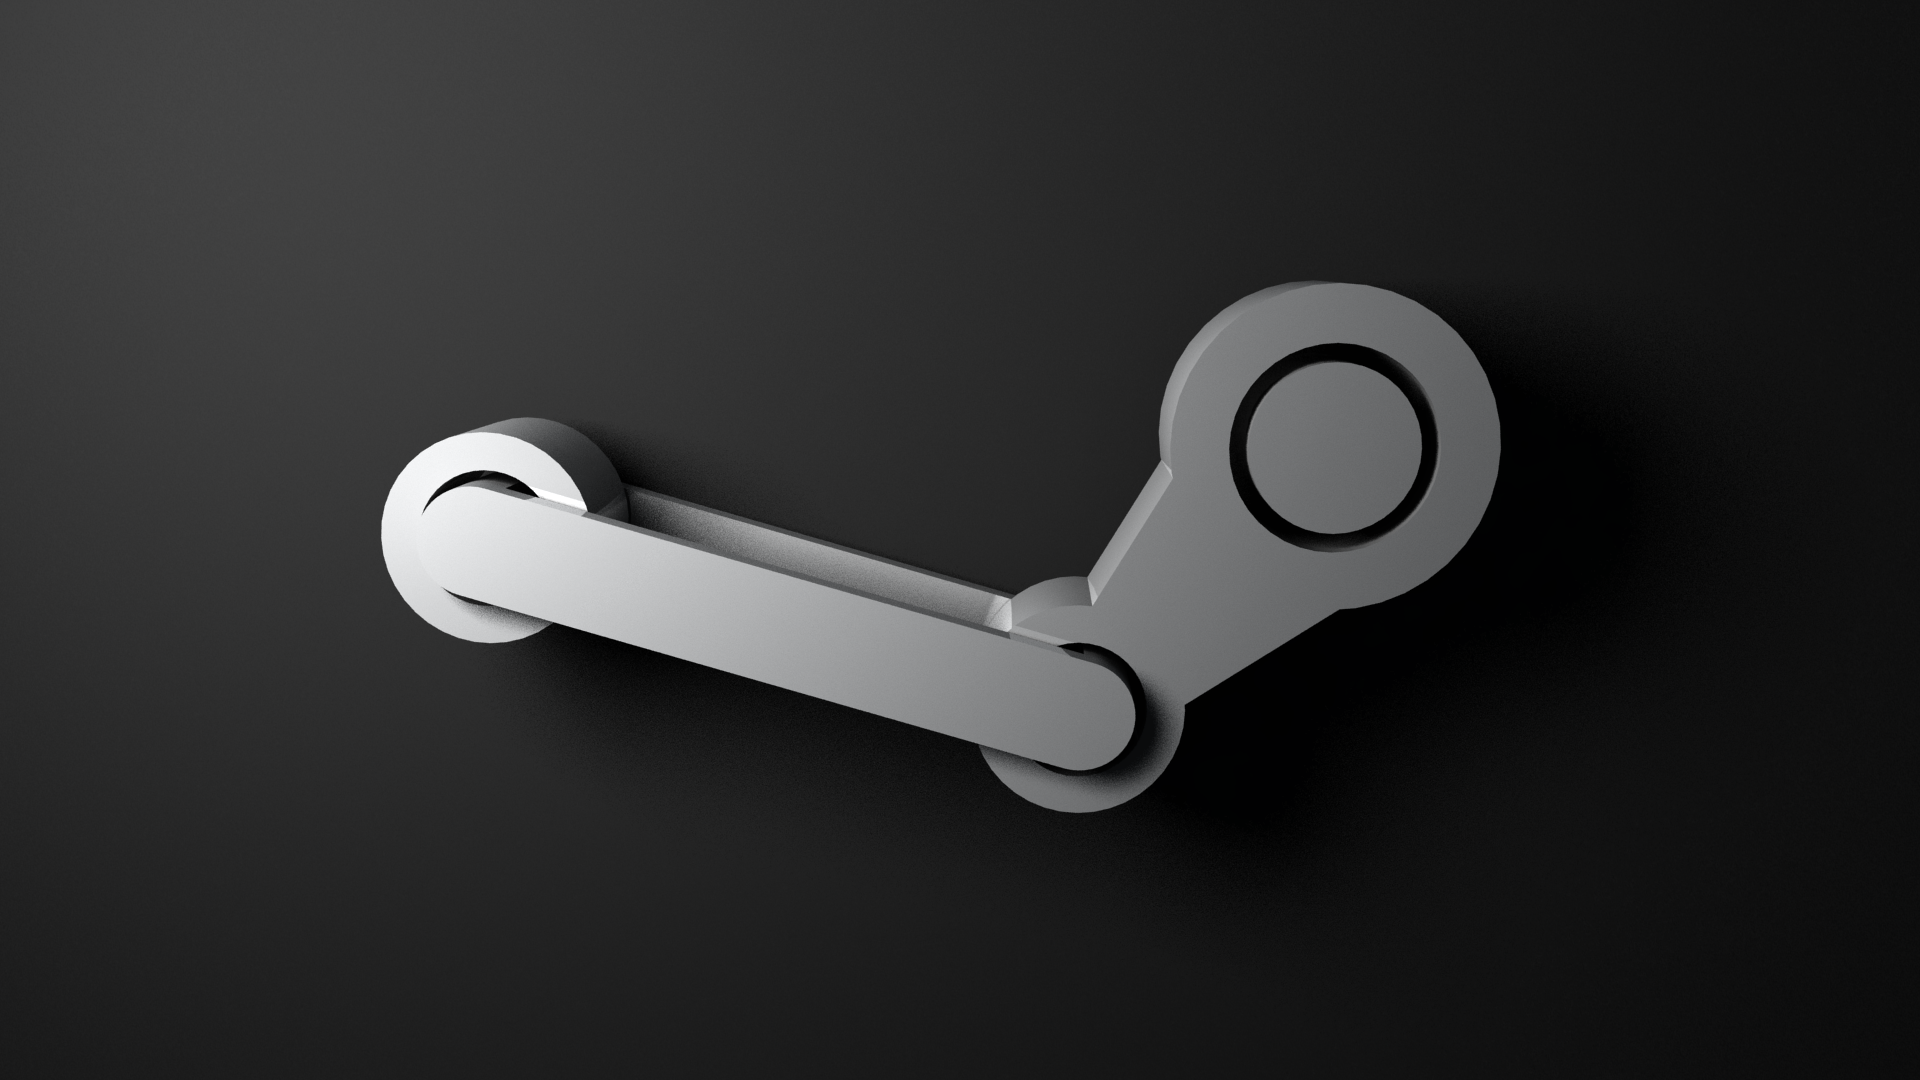 Steam rises to 65 million active users, topping Xbox Live